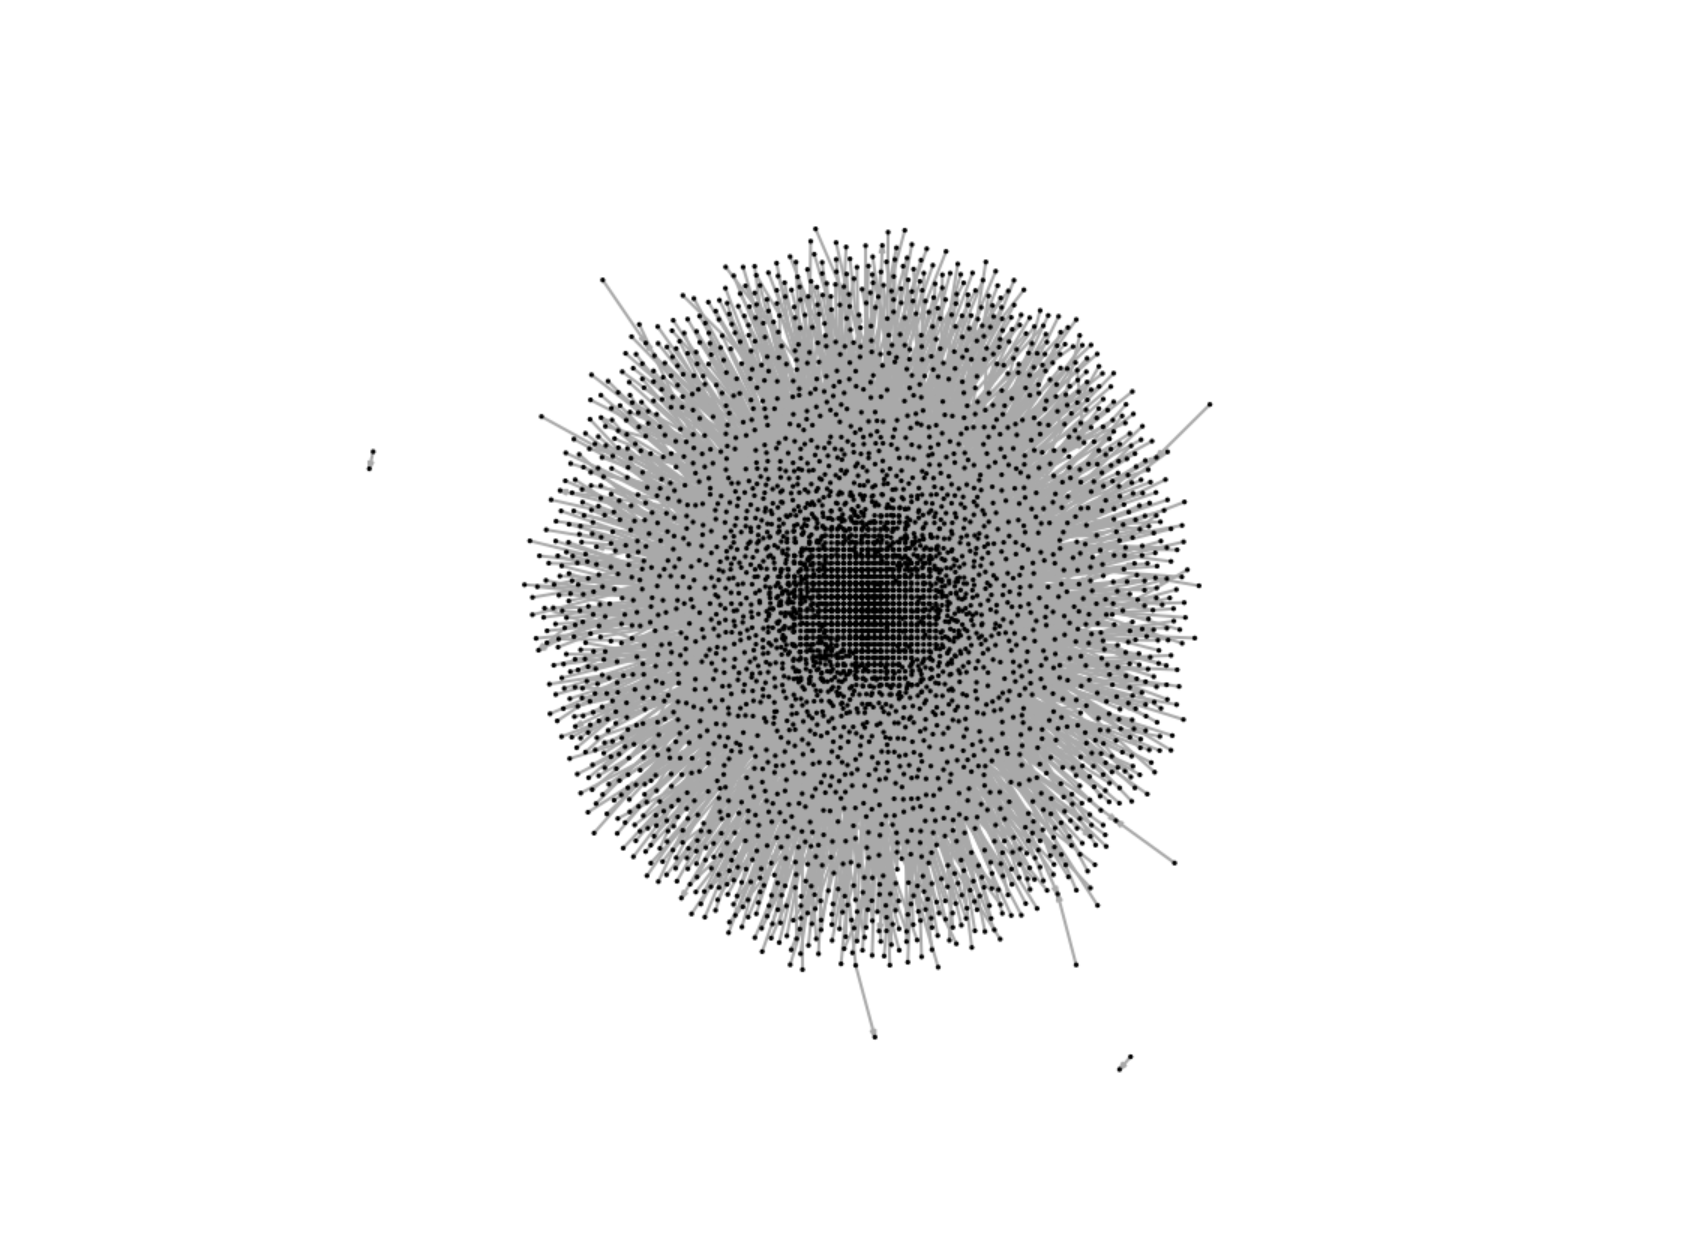 Example of a hairball generated by trying to visualize a large network of Wikipedia votes for administrators